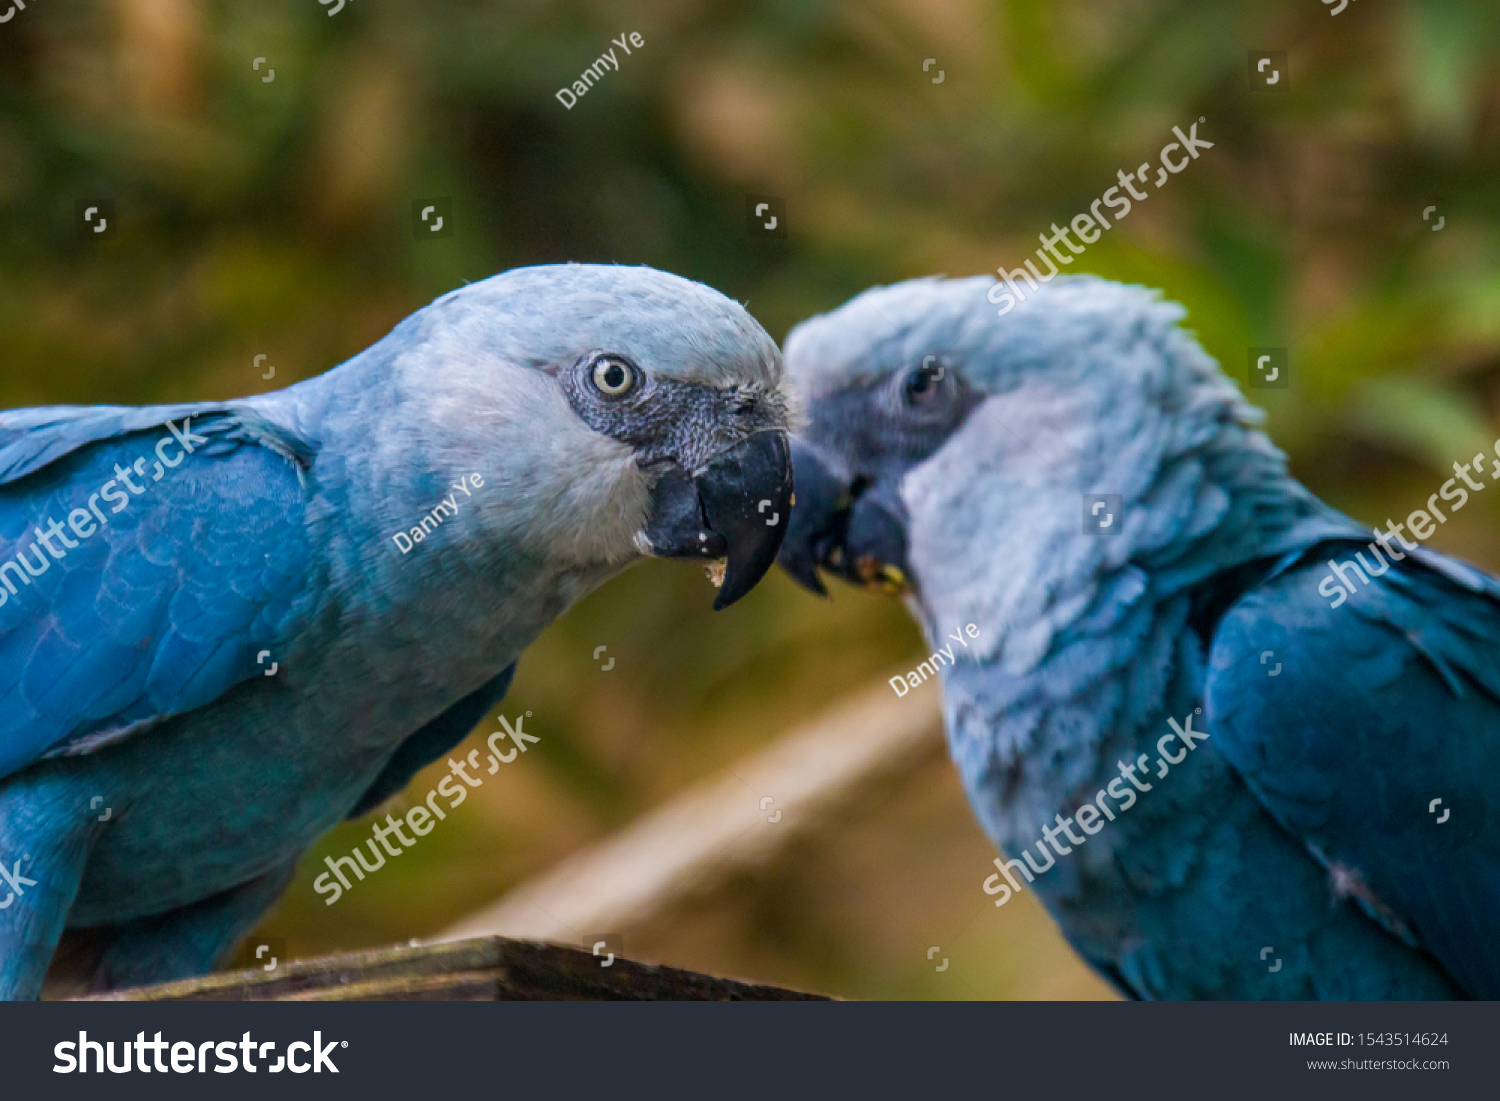 The Spix's macaw is a macaw native to Brazil. The bird is a medium-size parrot. The IUCN regard the Spix's macaw as probably extinct in the wild. Its last known stronghold in the wild was in  Brazil.  #1543514624